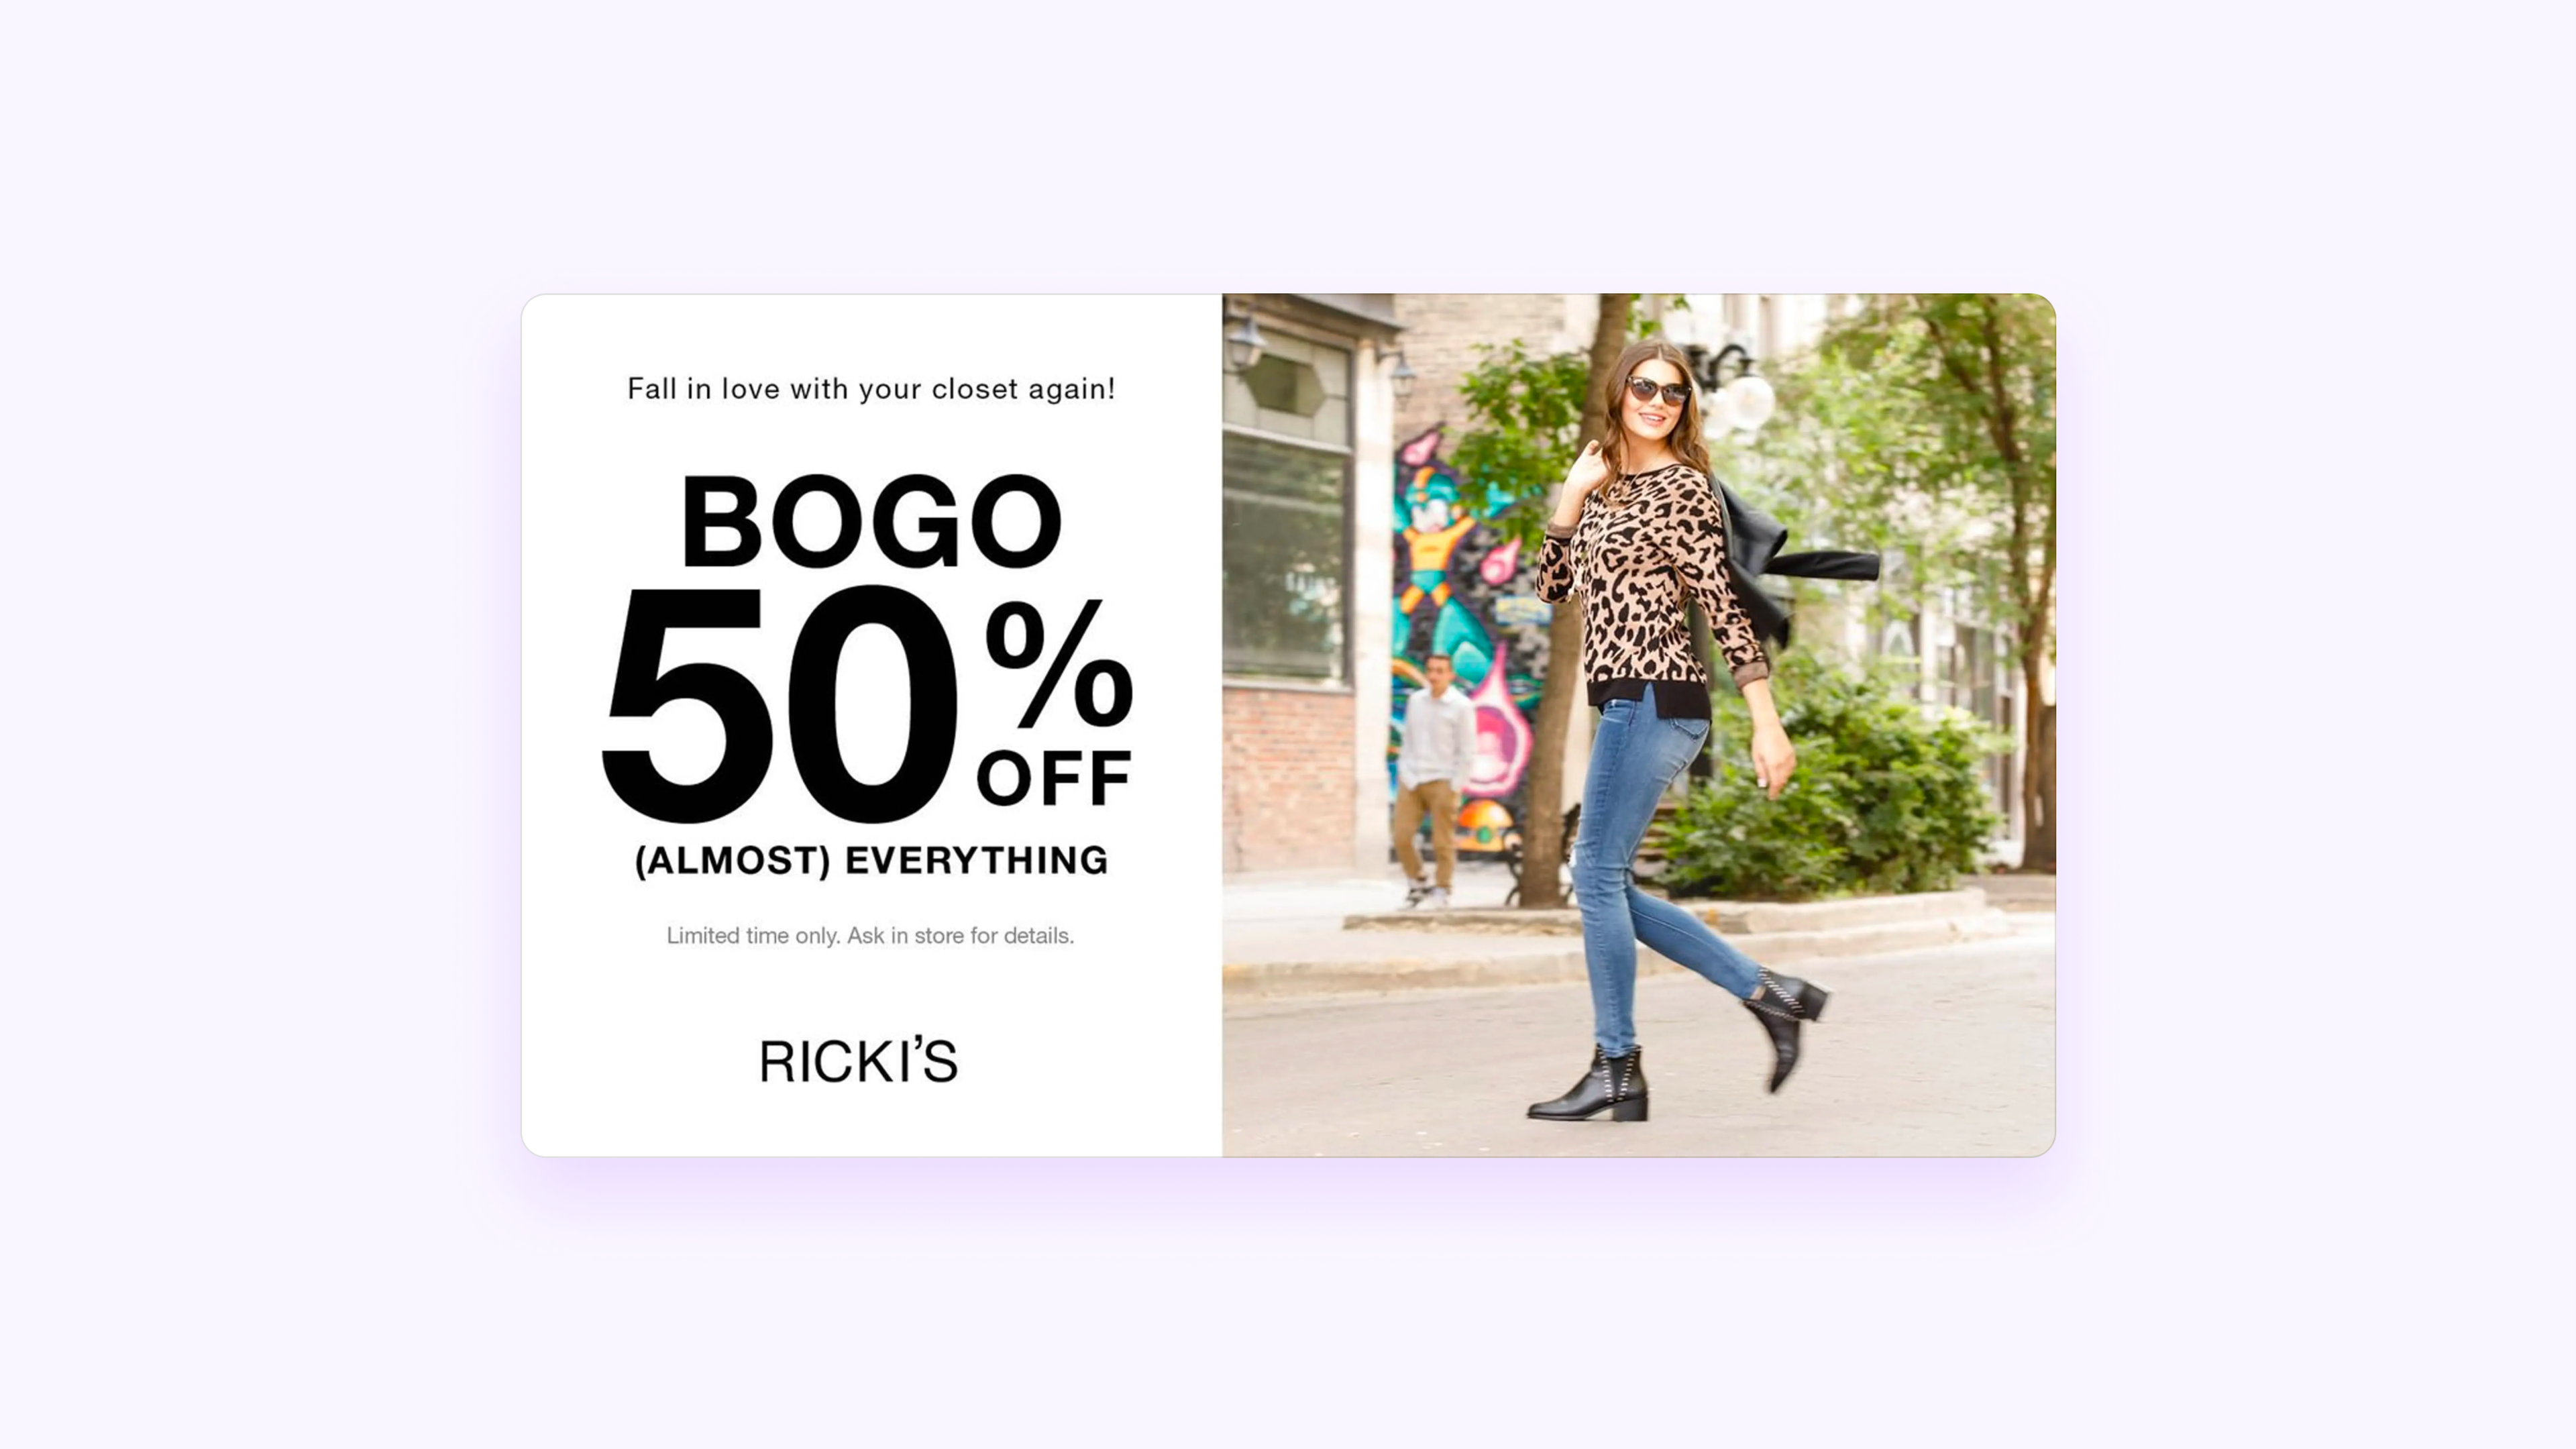 Image depicts 'buy one, get one 50% off' offer from retailer Ricki's